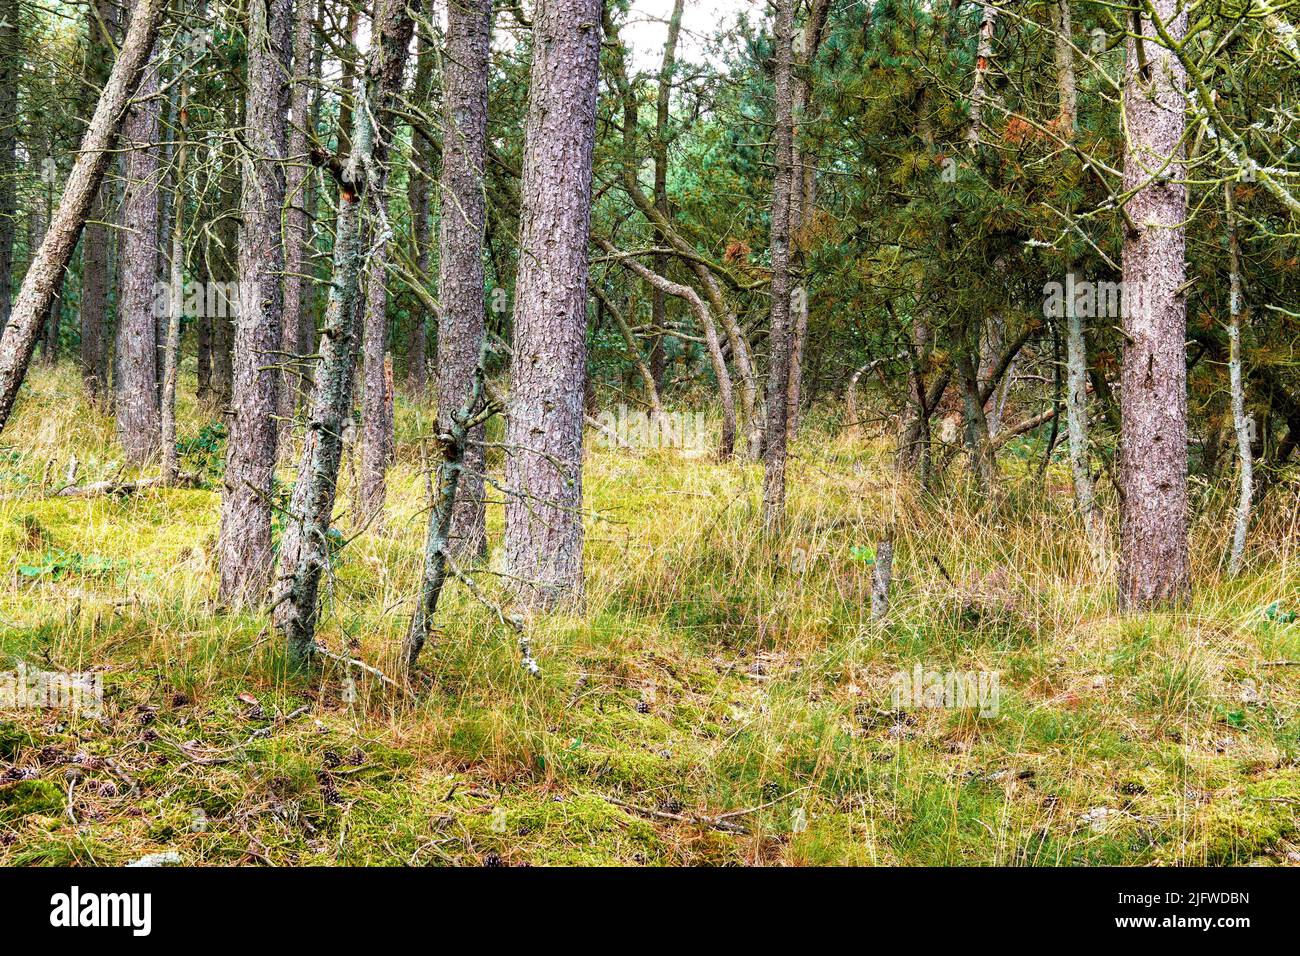 Landscape of tall spruce trees in the woods with overgrown grass. Low angle of straight pine trunks in a remote forest with wild uncultivated shrubs Stock Photo